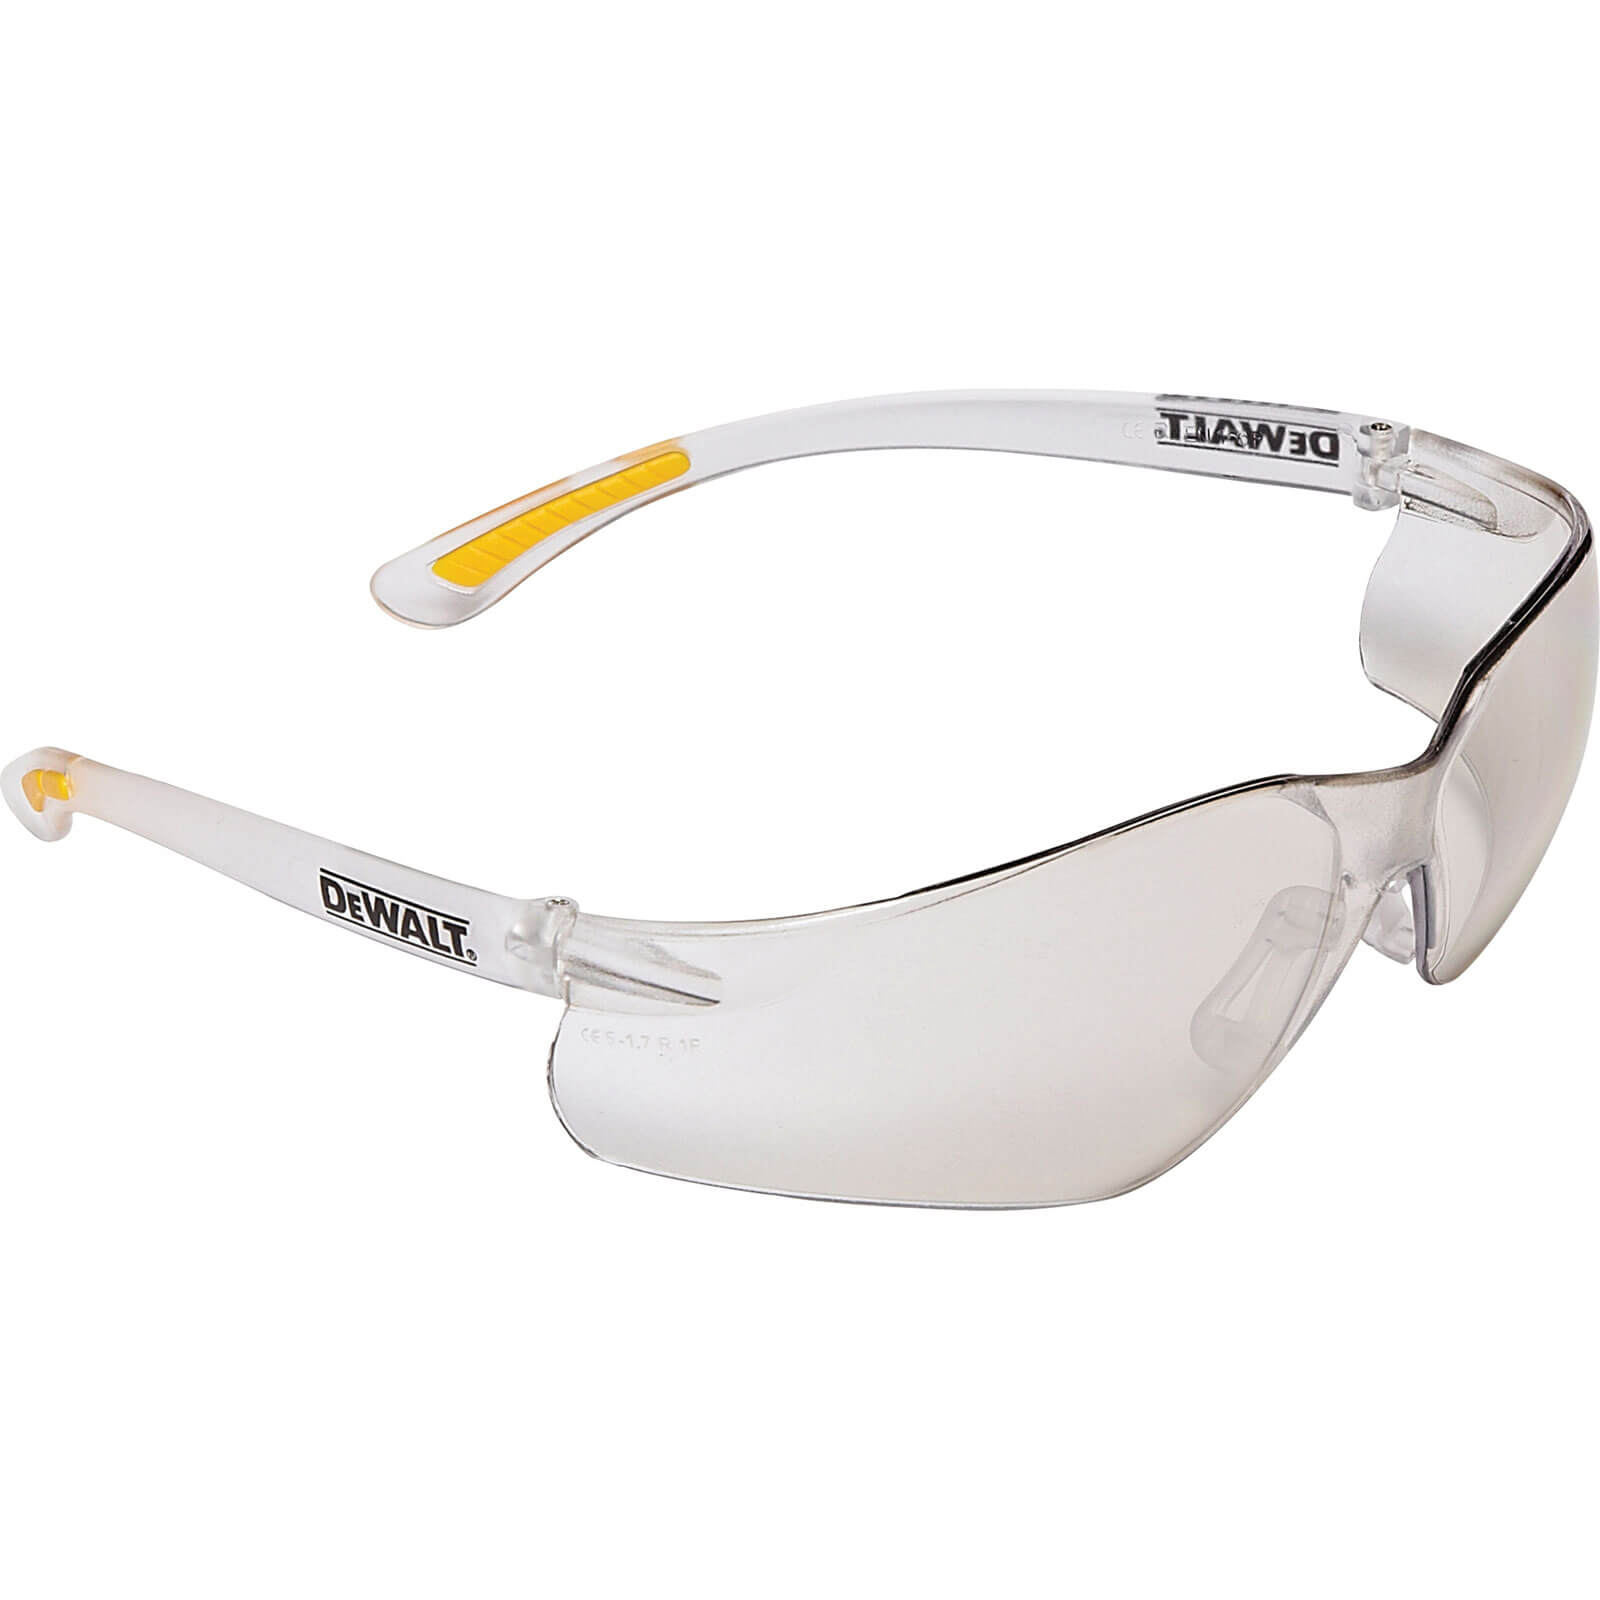 DeWalt Contractor Pro In / Out Safety Glasses Smoke